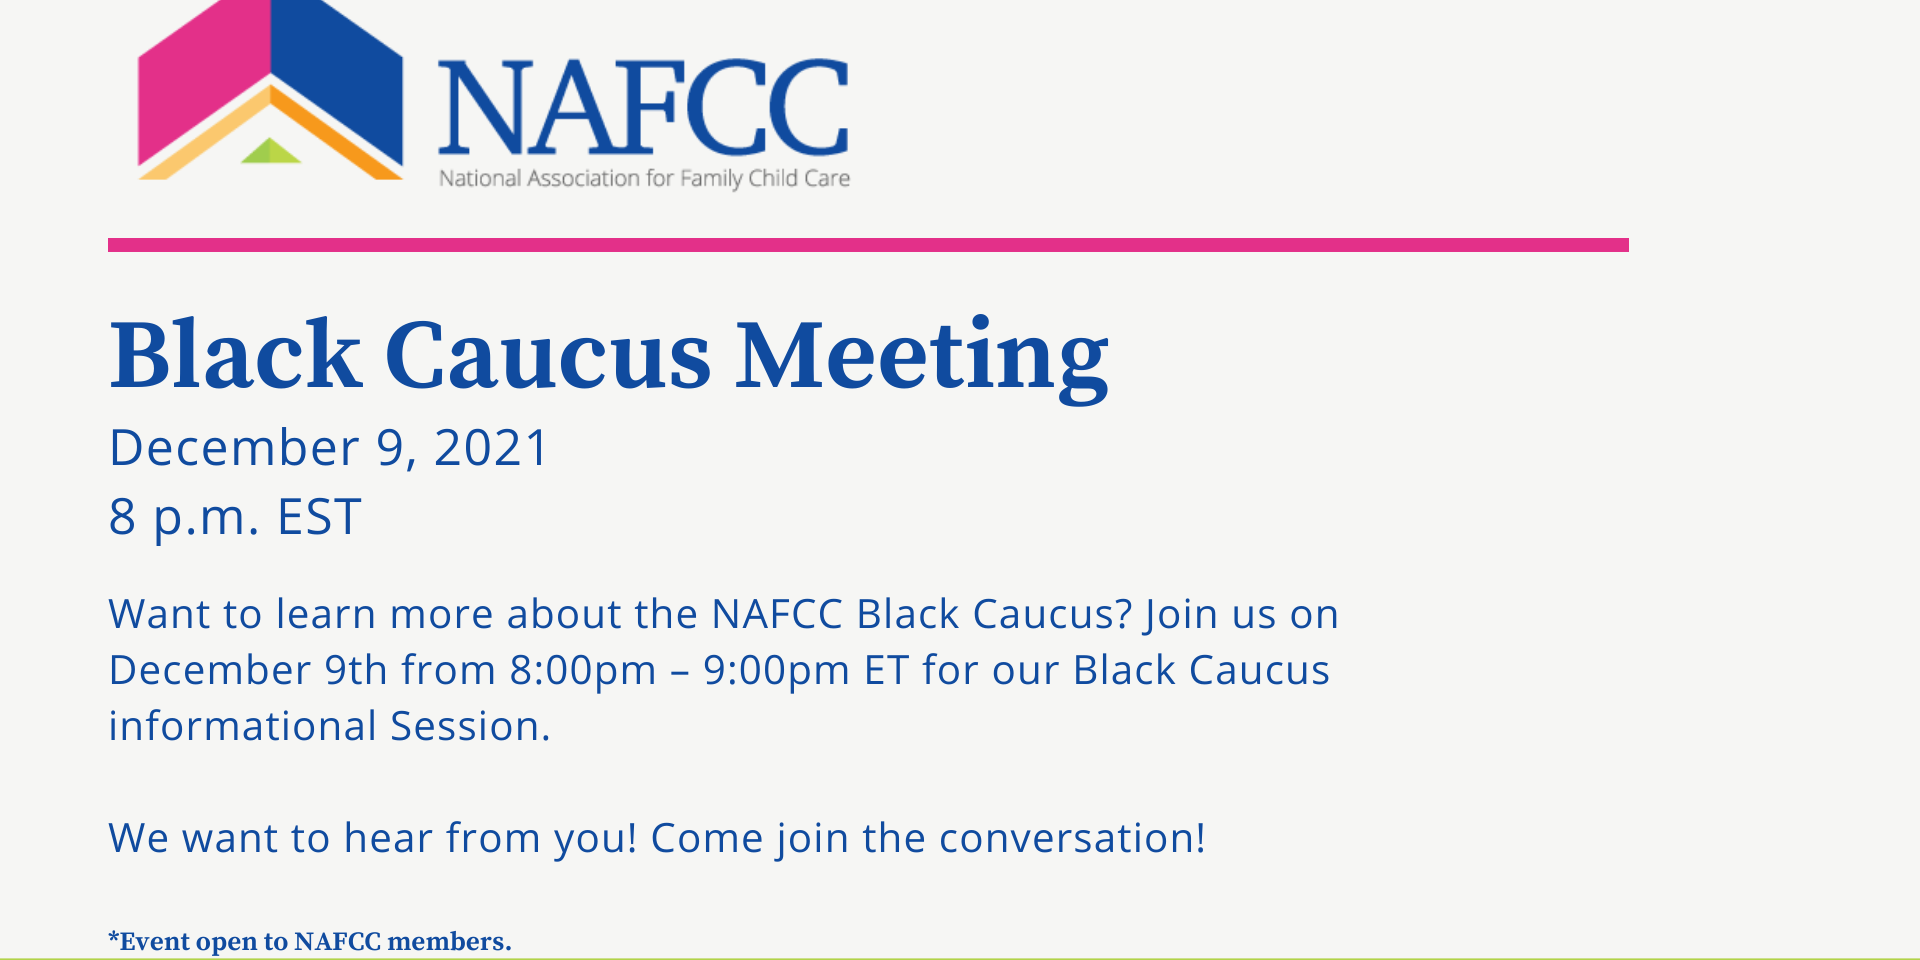 Black Caucus Informational Session National Association for Family